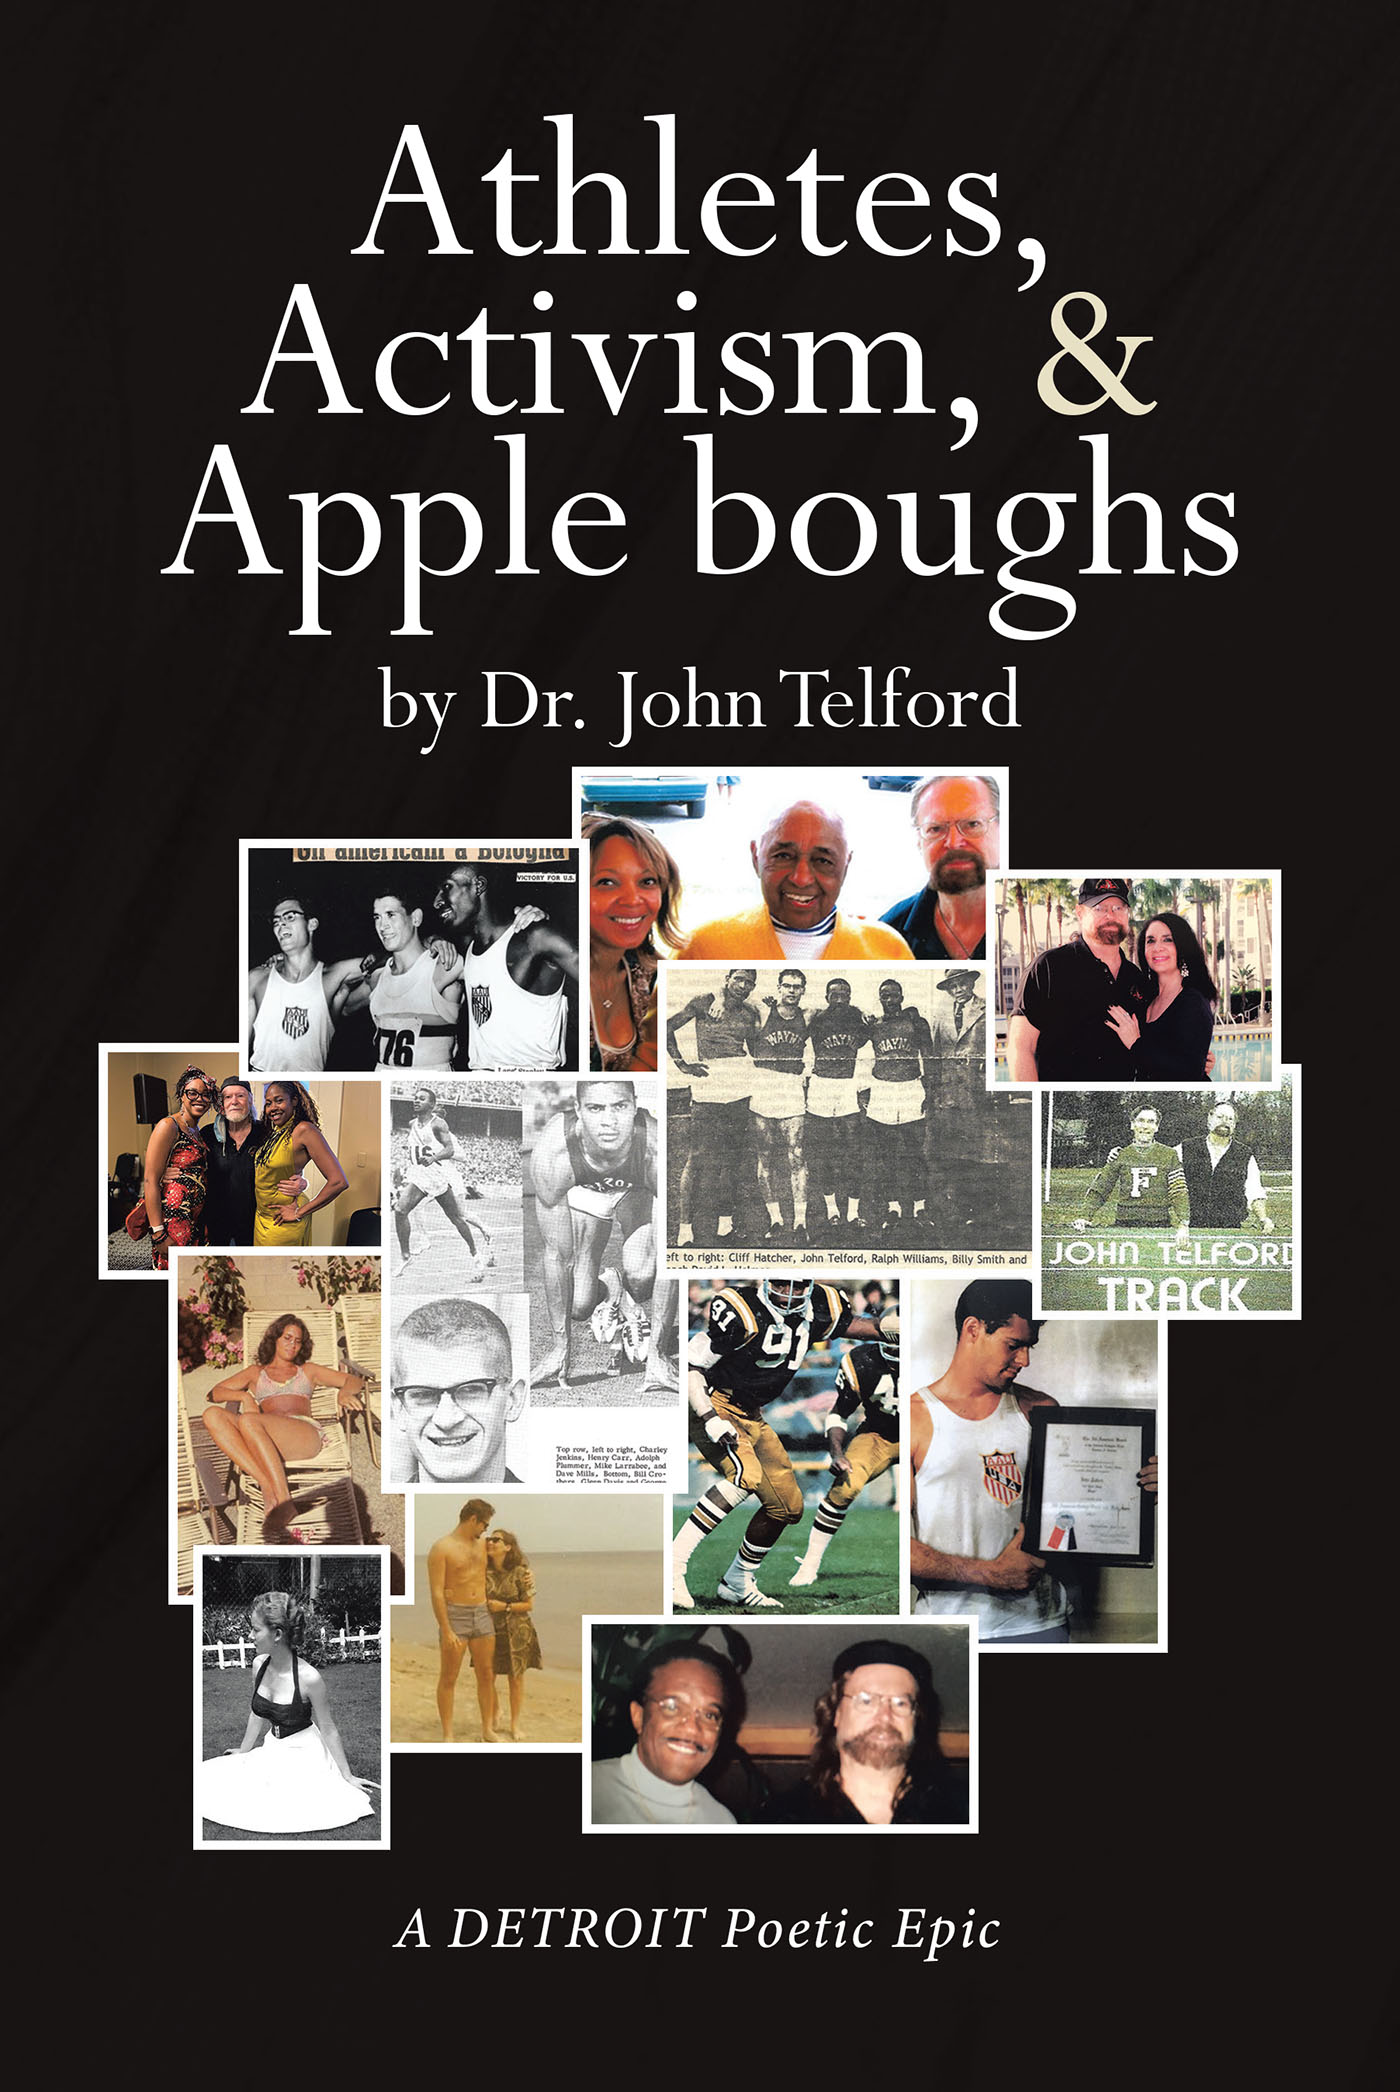 Author Dr. John Telford’s New Book, “Athletes, Activism, & Apple Boughs: A DETROIT Poetic Epic,” is a Meaningful Collection of Powerful Poetry